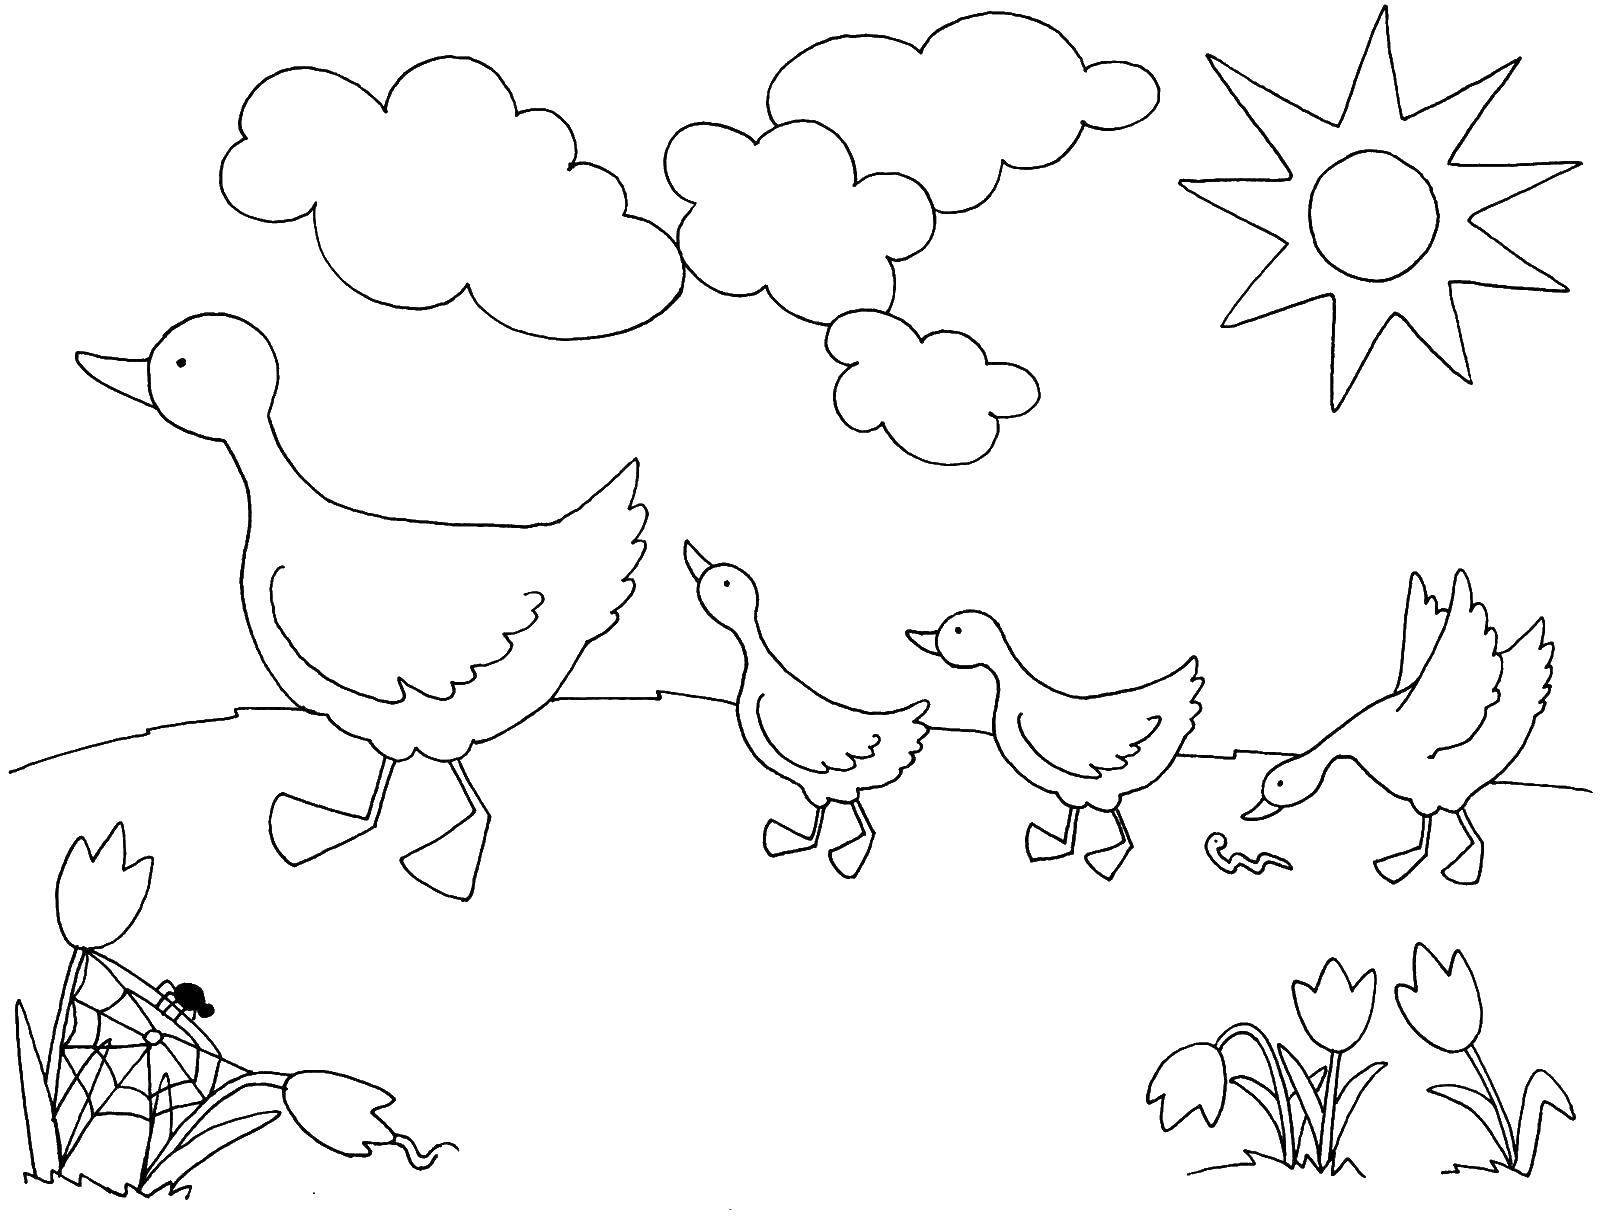 Coloring Geese walking across the meadow. Category Animals. Tags:  geese, field.